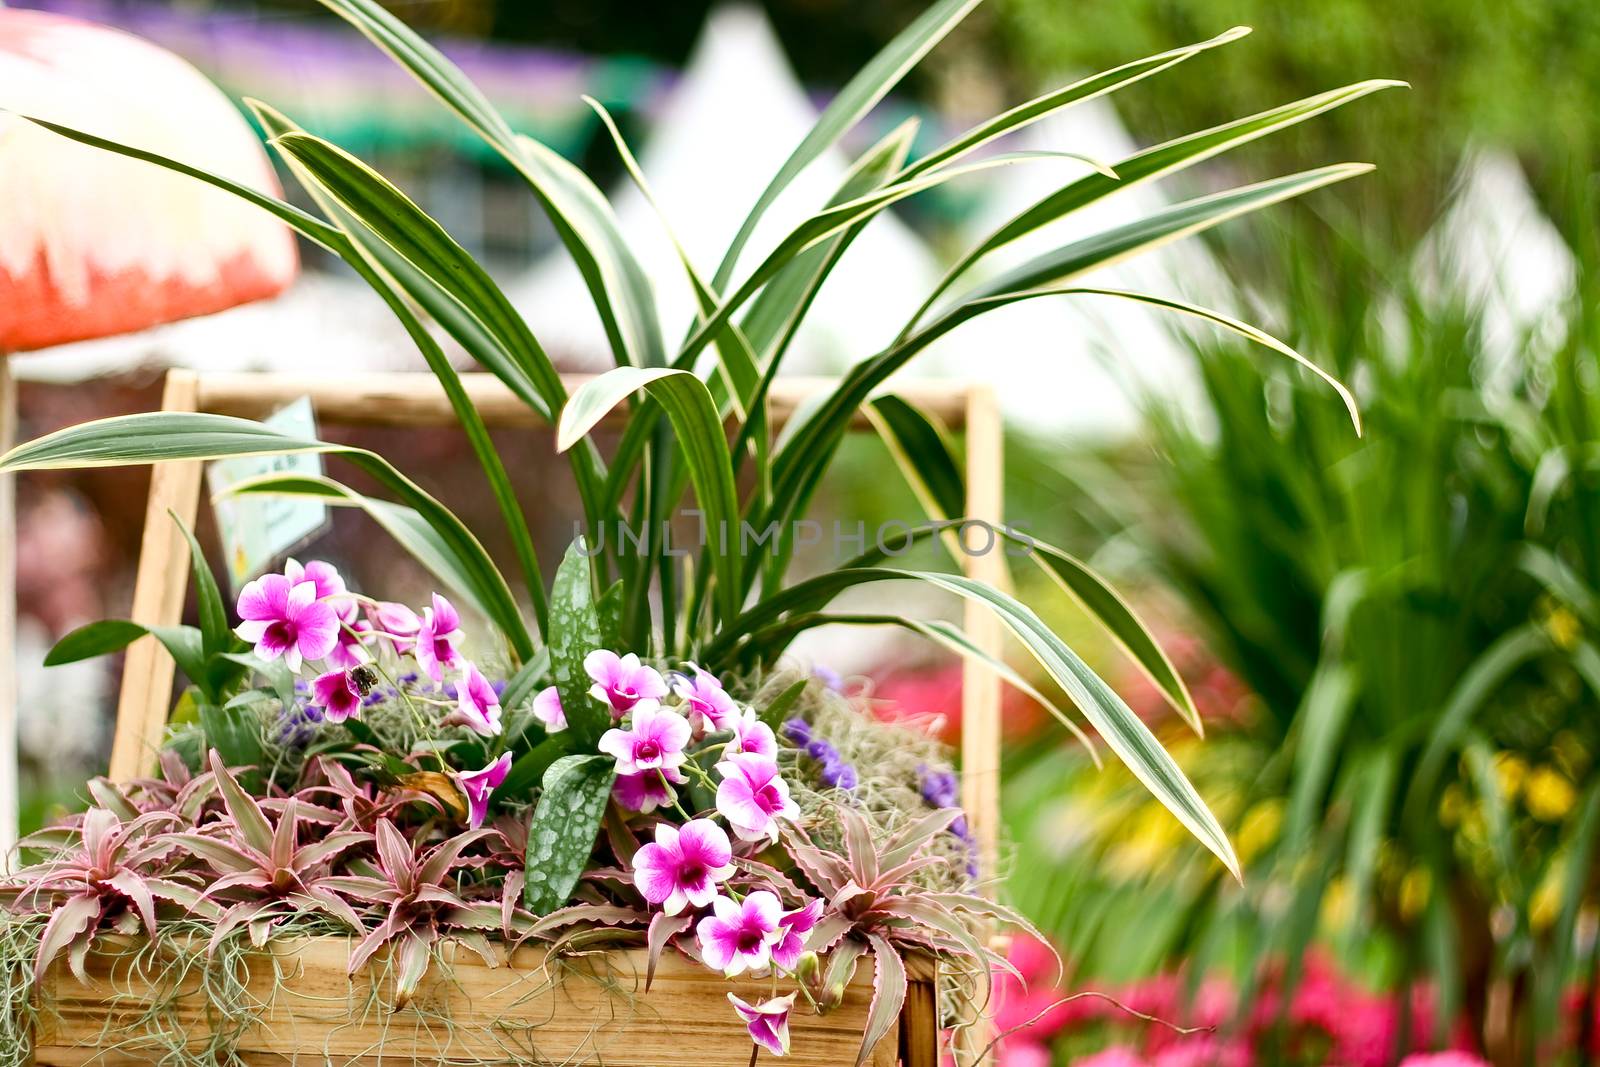 Flowers in a wooden basket with blur background